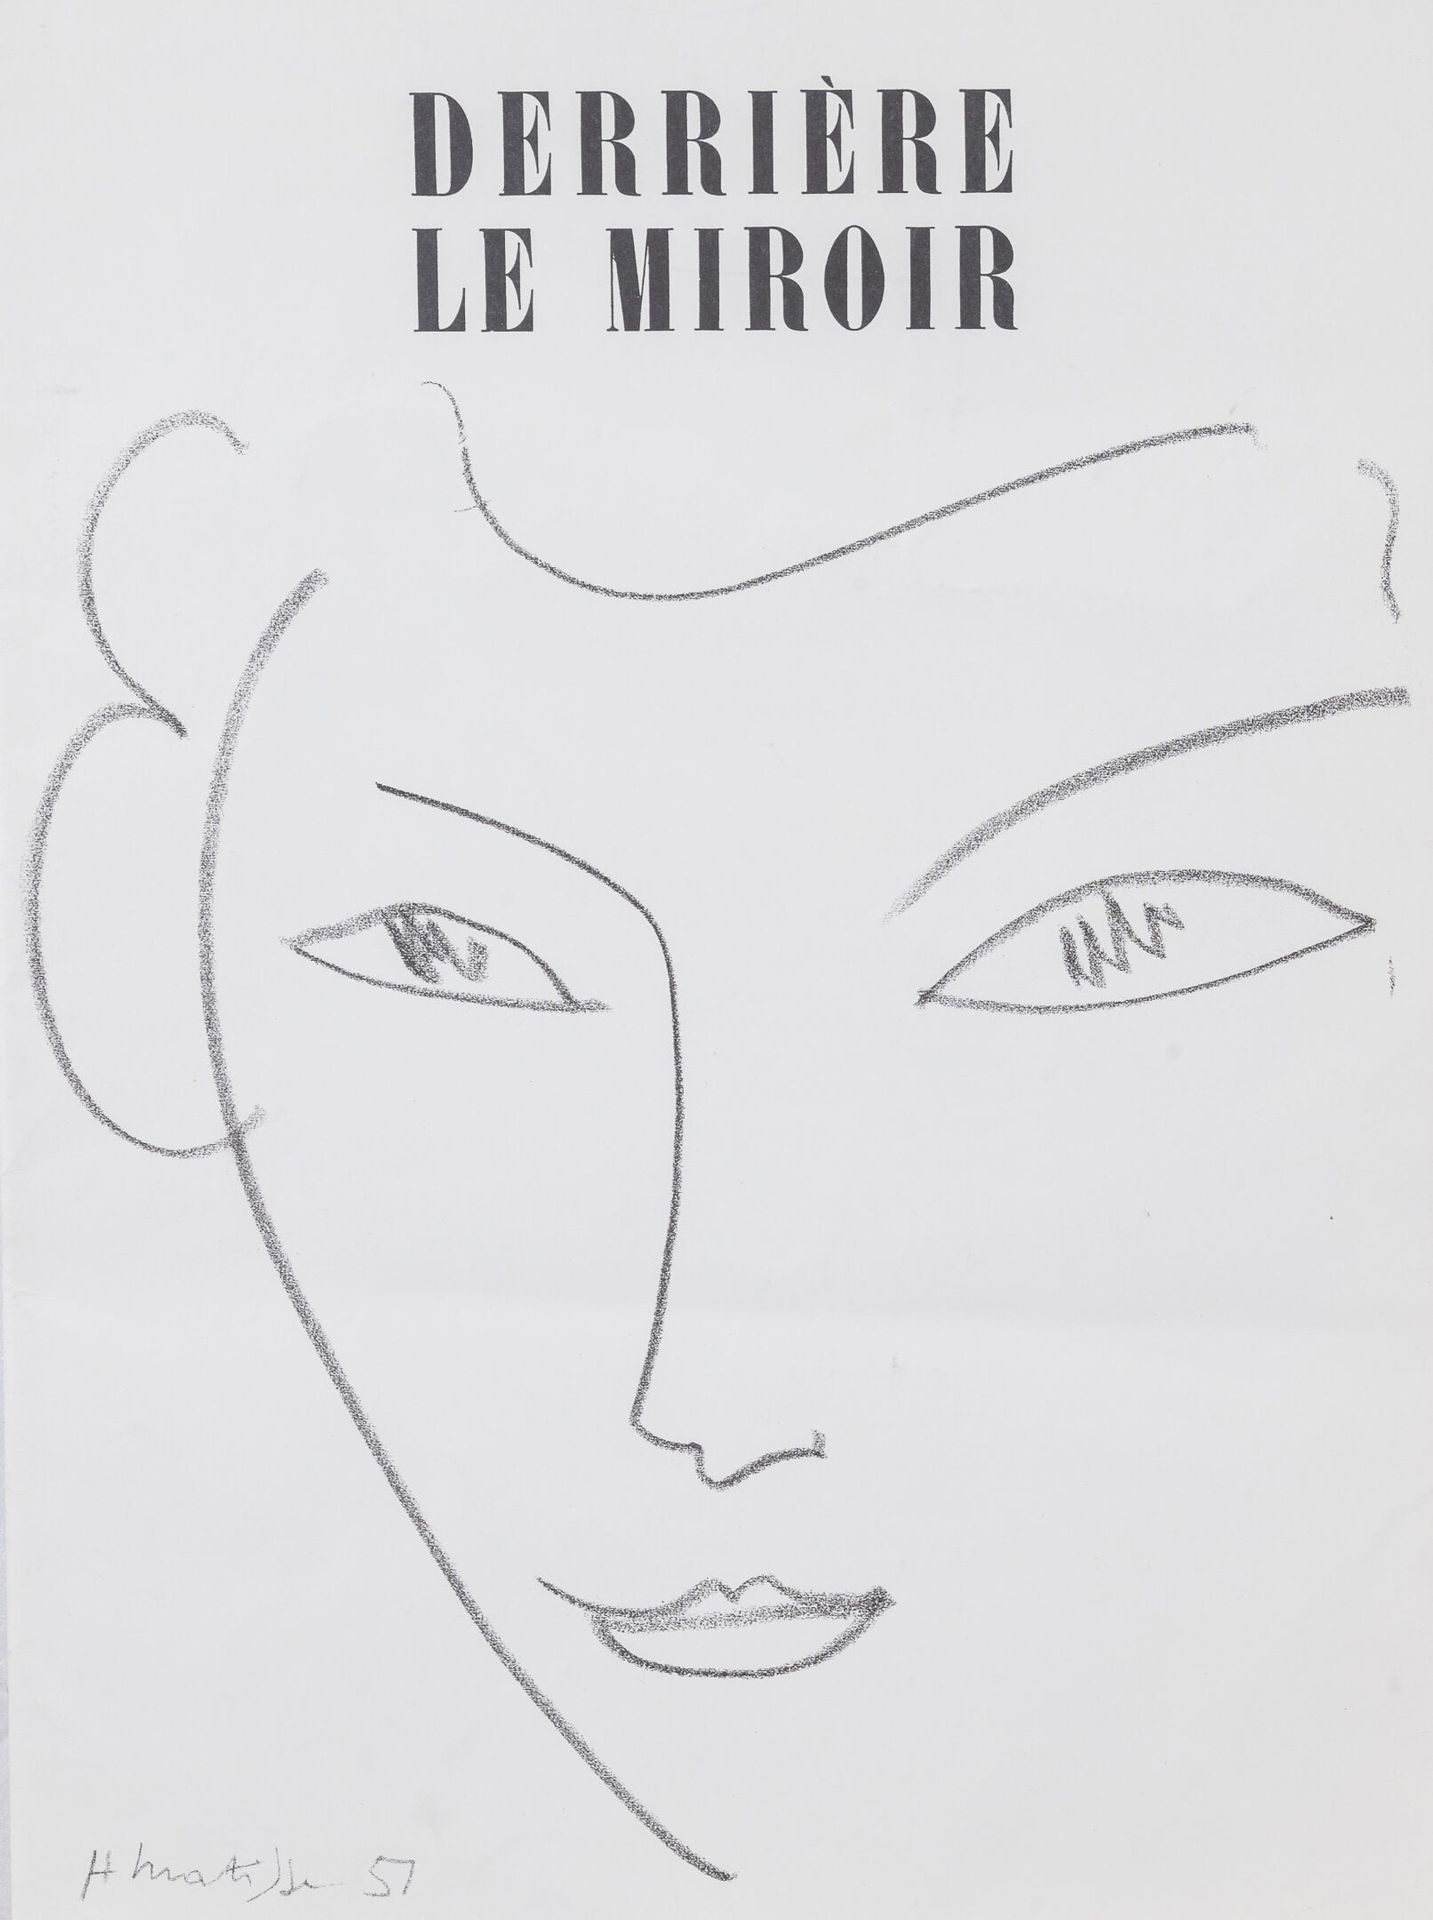 MATISSE, HENRI Behind the mirror, reissue of 1981.

Fascicle editions Pierre à f&hellip;